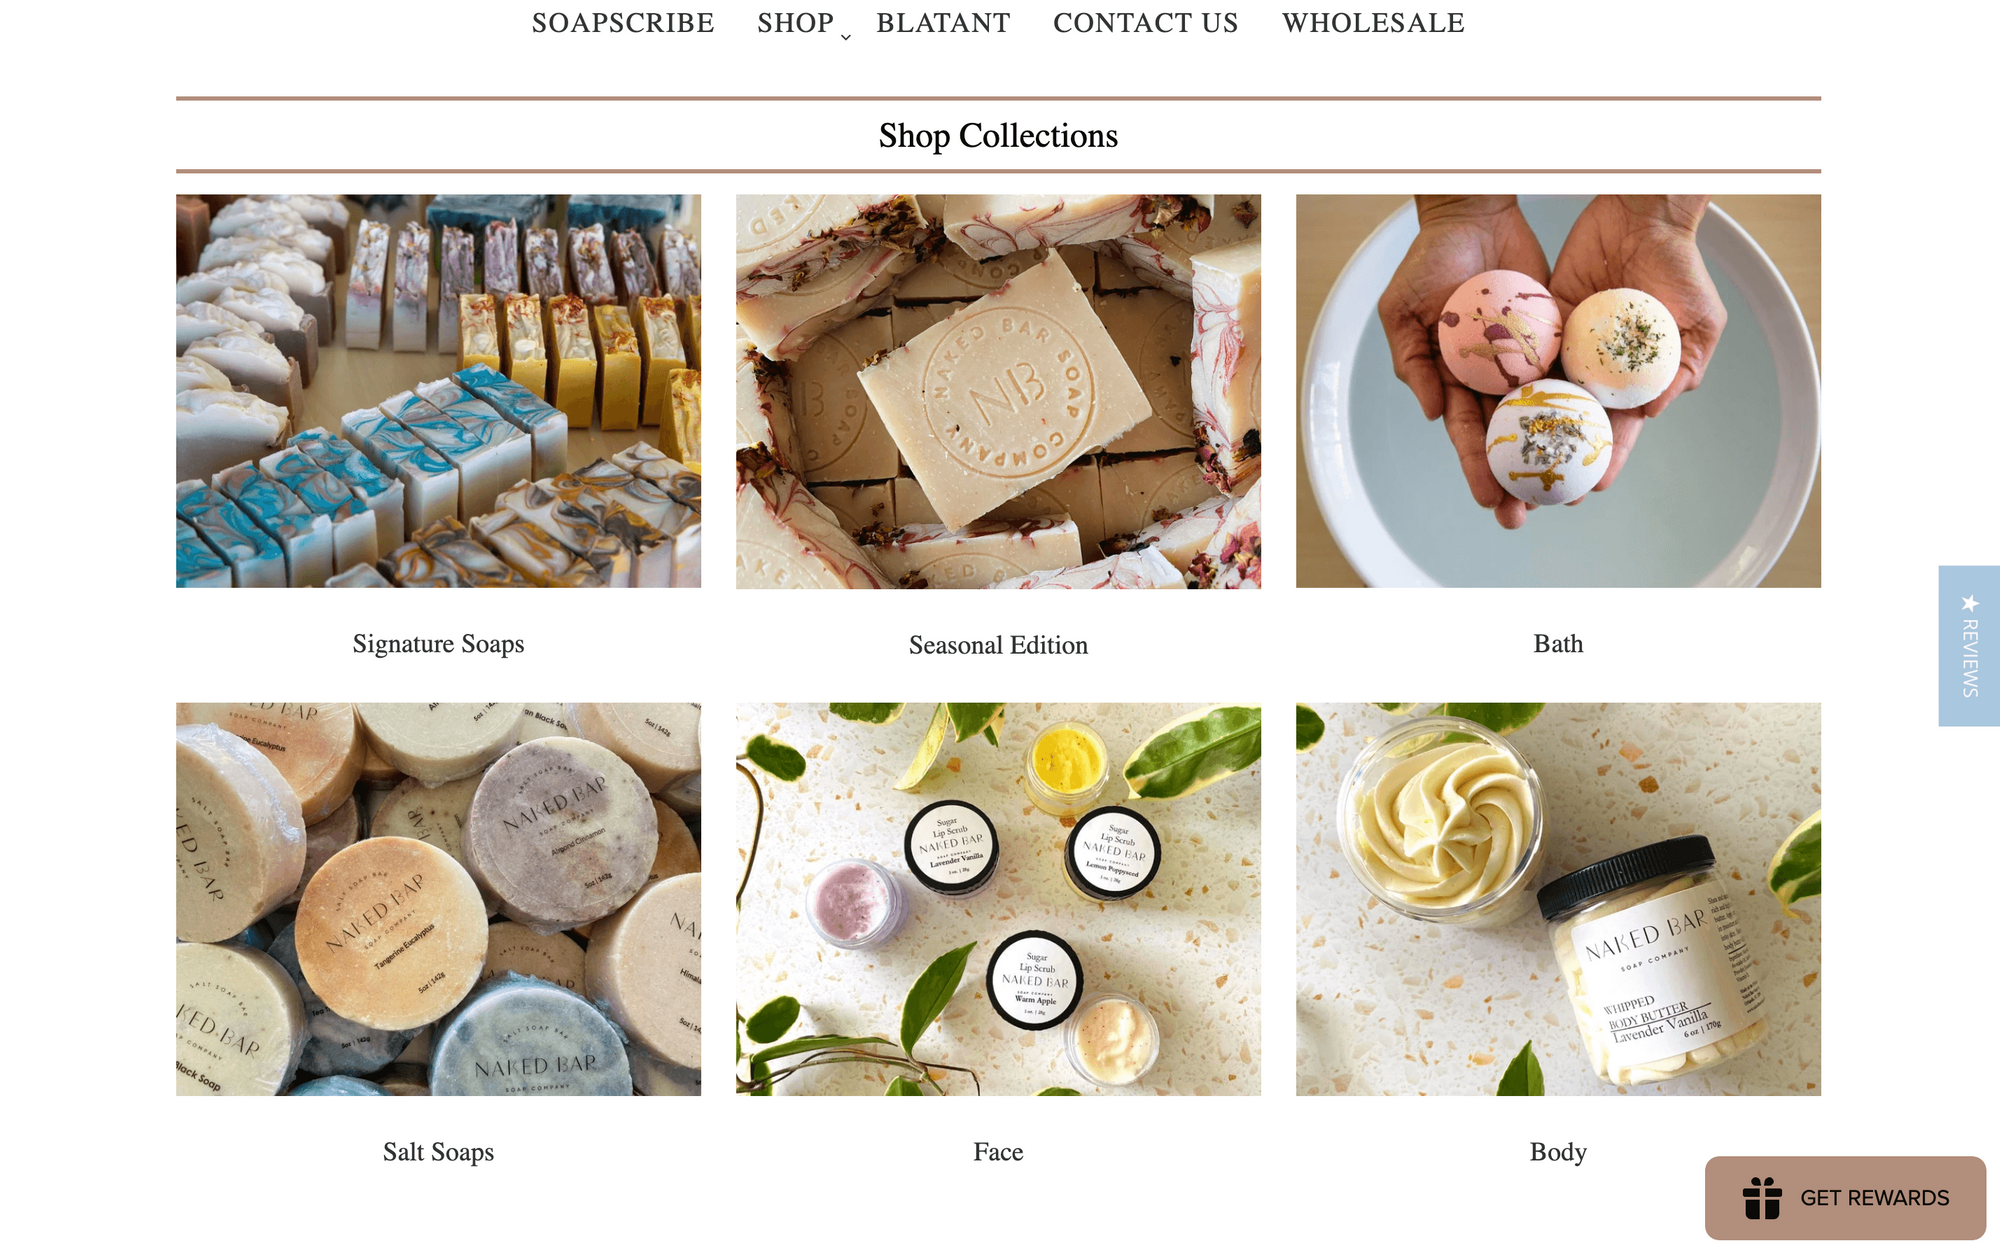 Valentine’s Day Gift Guide–A screenshot from Naked Bar Soap’s homepage. The title is “Shop collection” and there are 6 images of their product collections: Signature Soaps, Seasonal Edition, Bath, Salt Soaps, Face, and Body. 